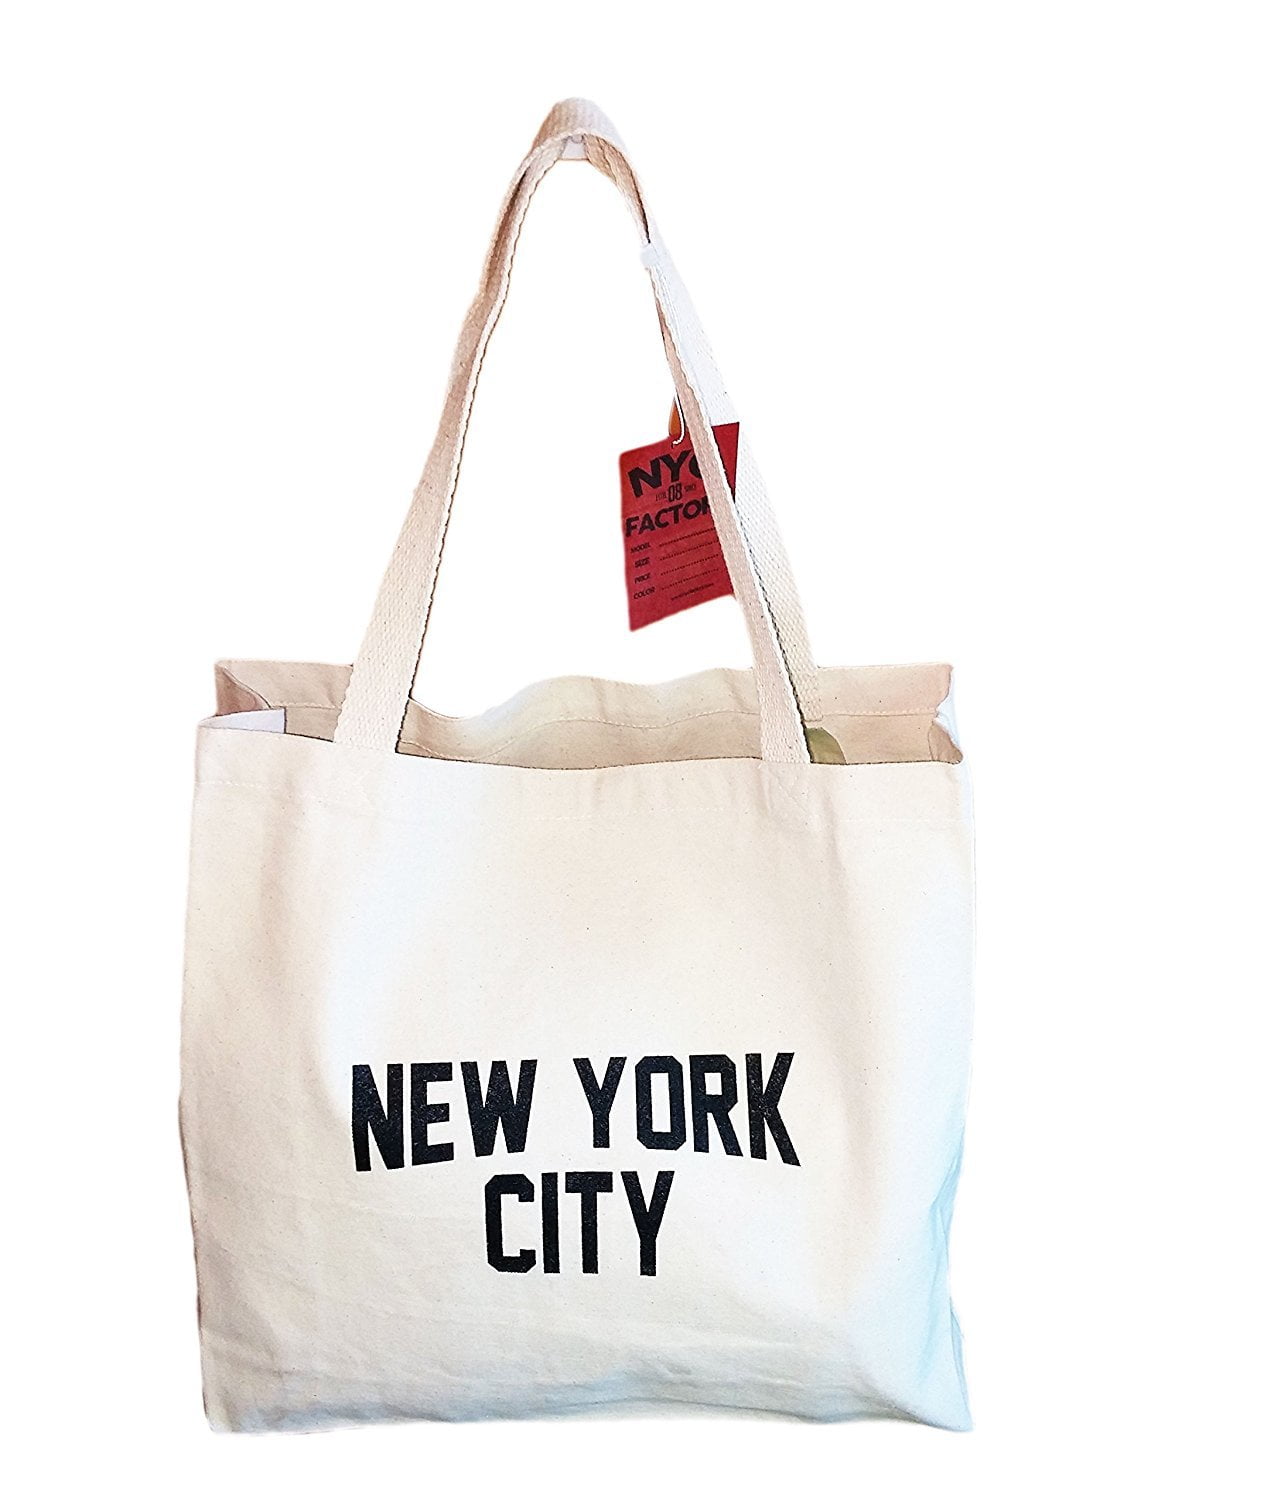 NYC FACTORY - Nyc Factory Gusseted New York City Tote Bag Lennon Style Shopping Gym Beach ...